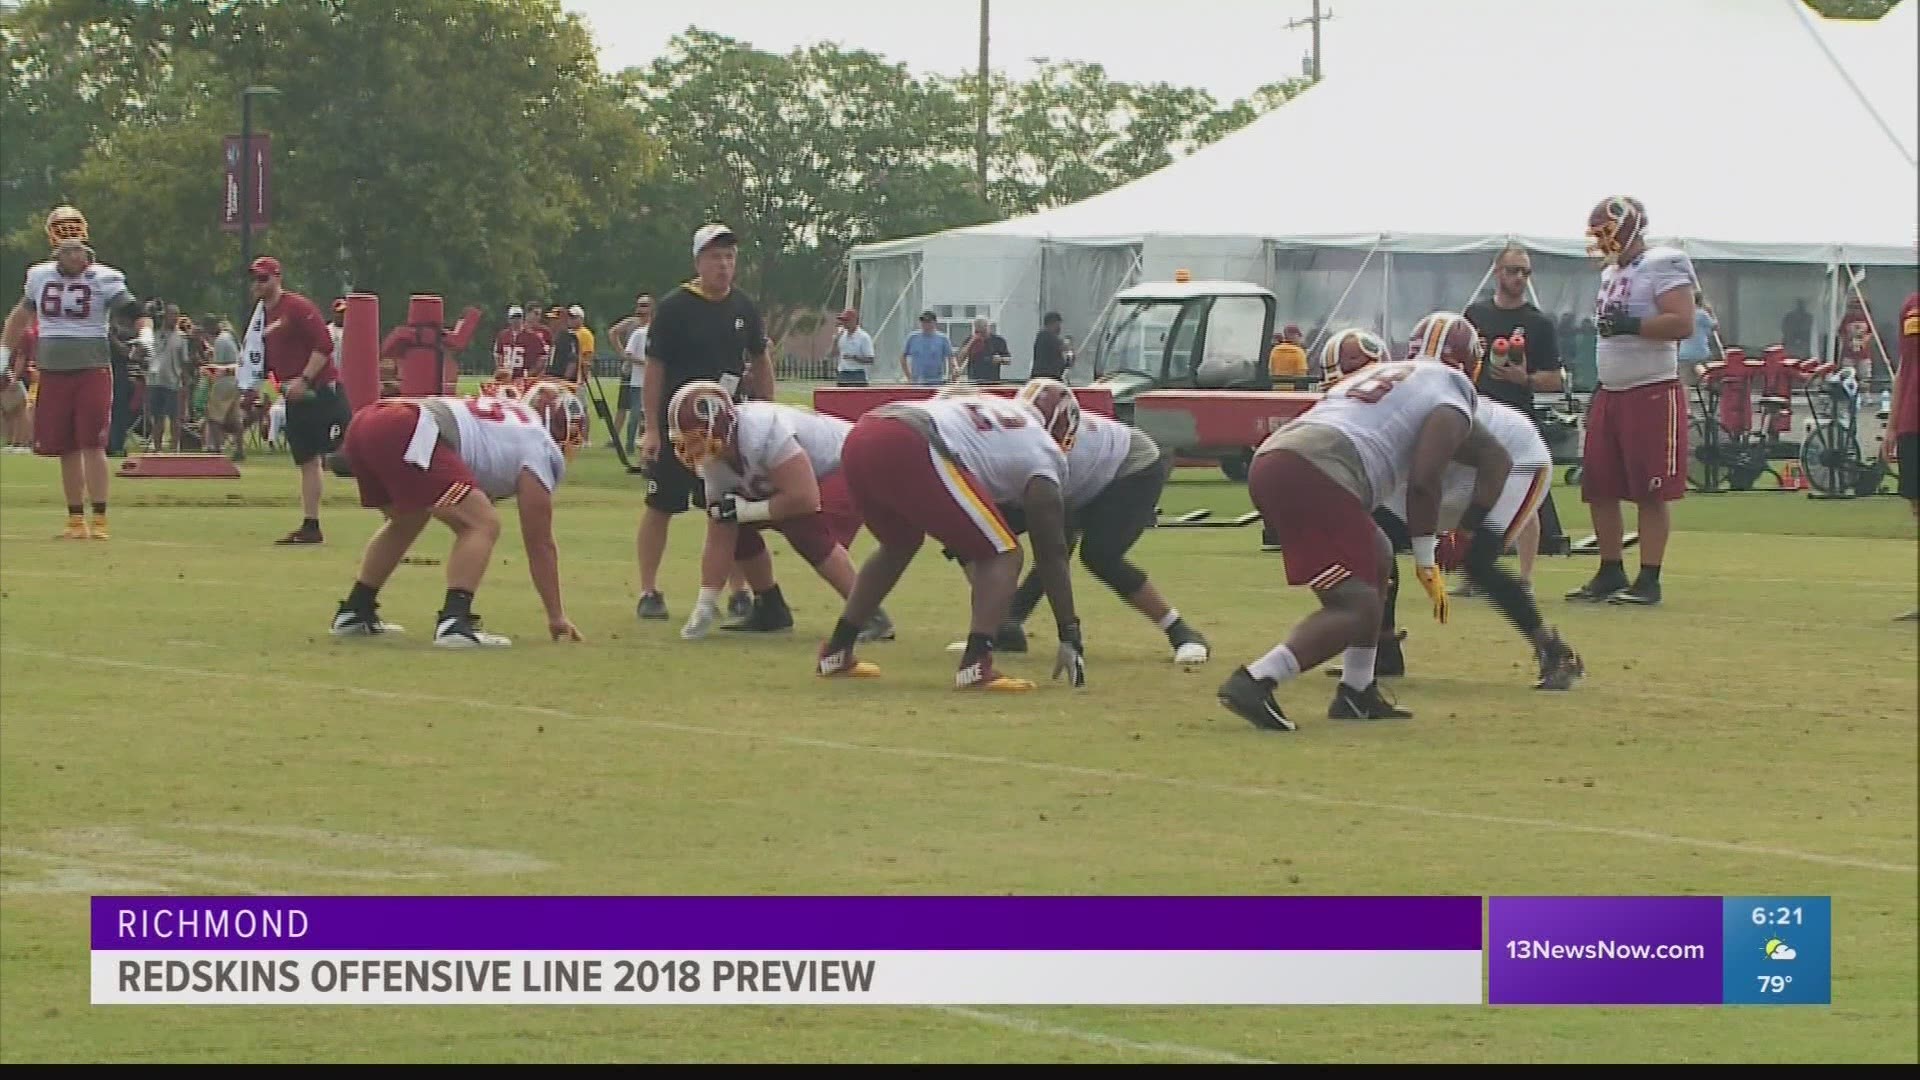 Struggling to stay healthy last season, the Redskins offensive line adds depth that could see plenty of improvement in 2018.